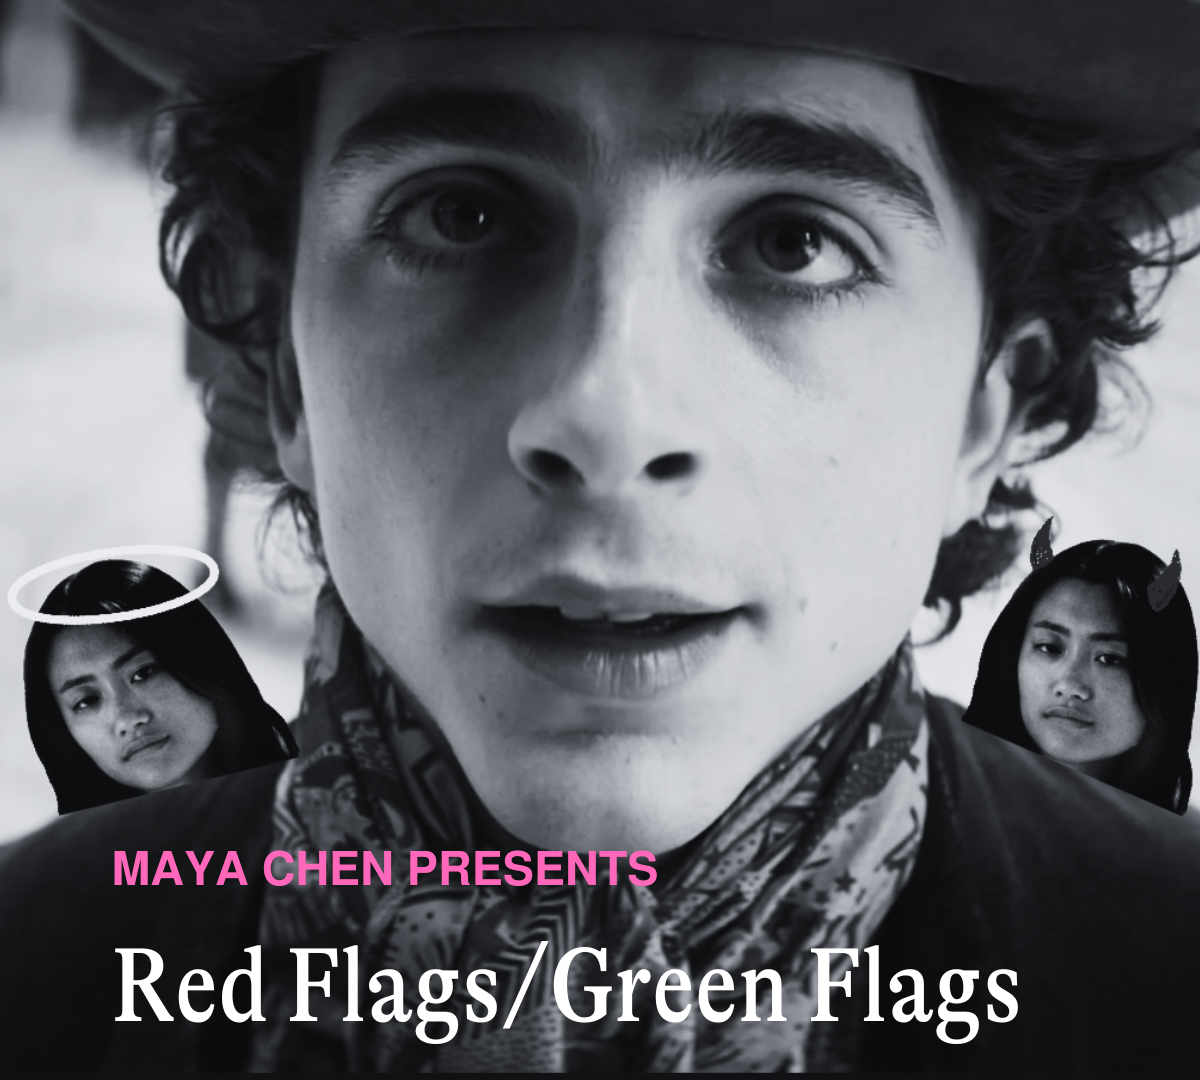 Red Flags/Green Flags